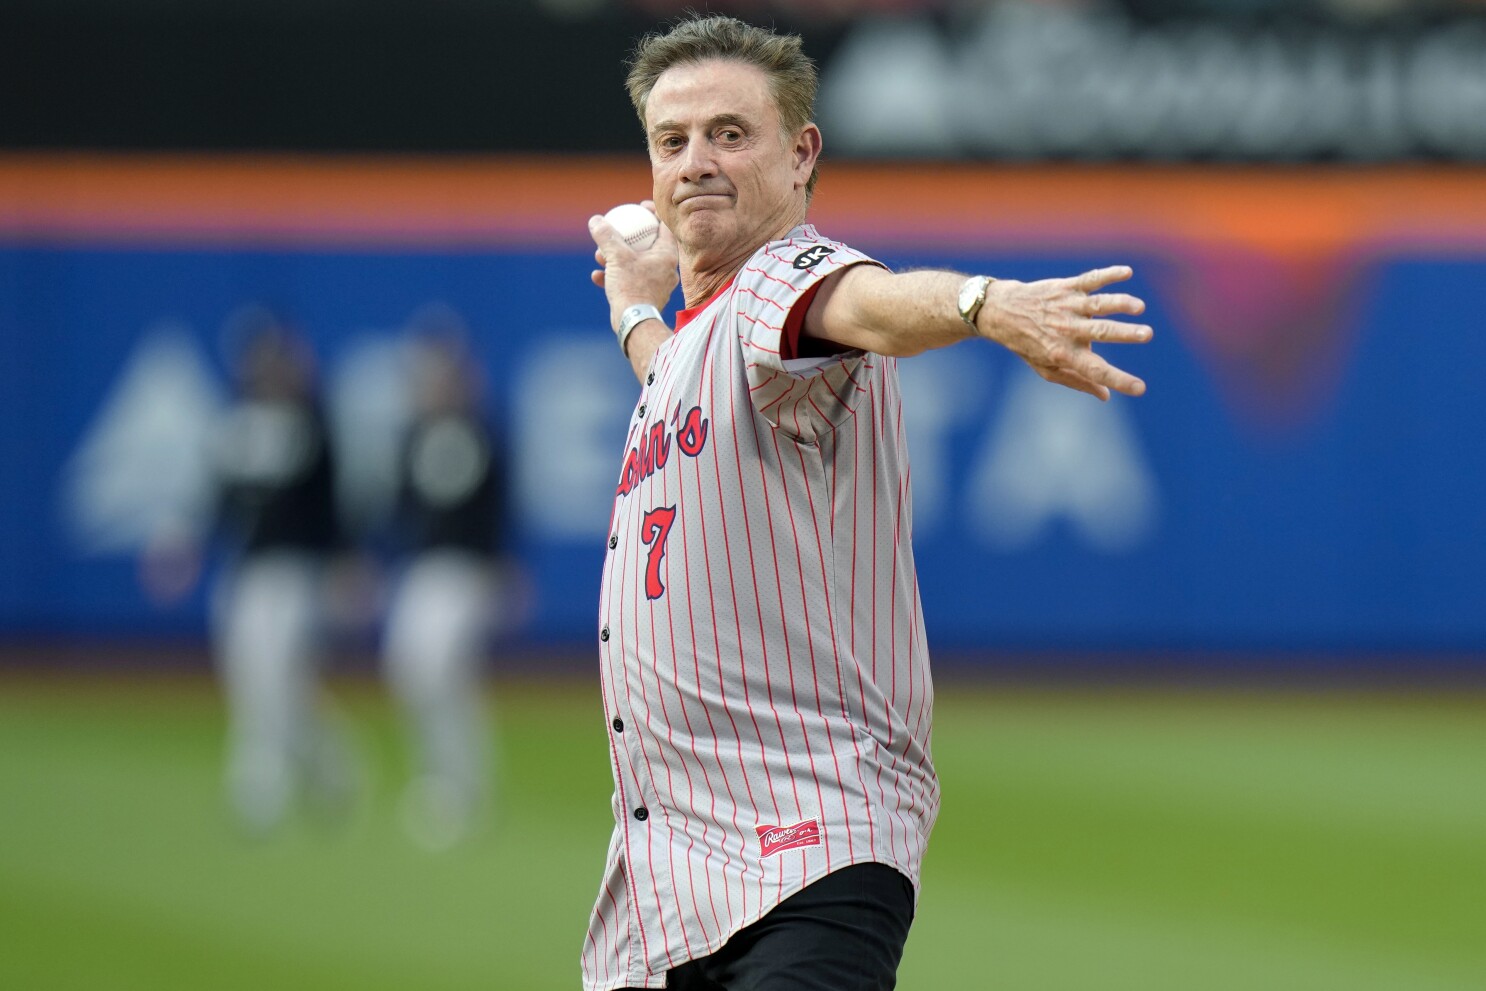 Rick Pitino, in NY state of mind at St John's, throws out first pitch